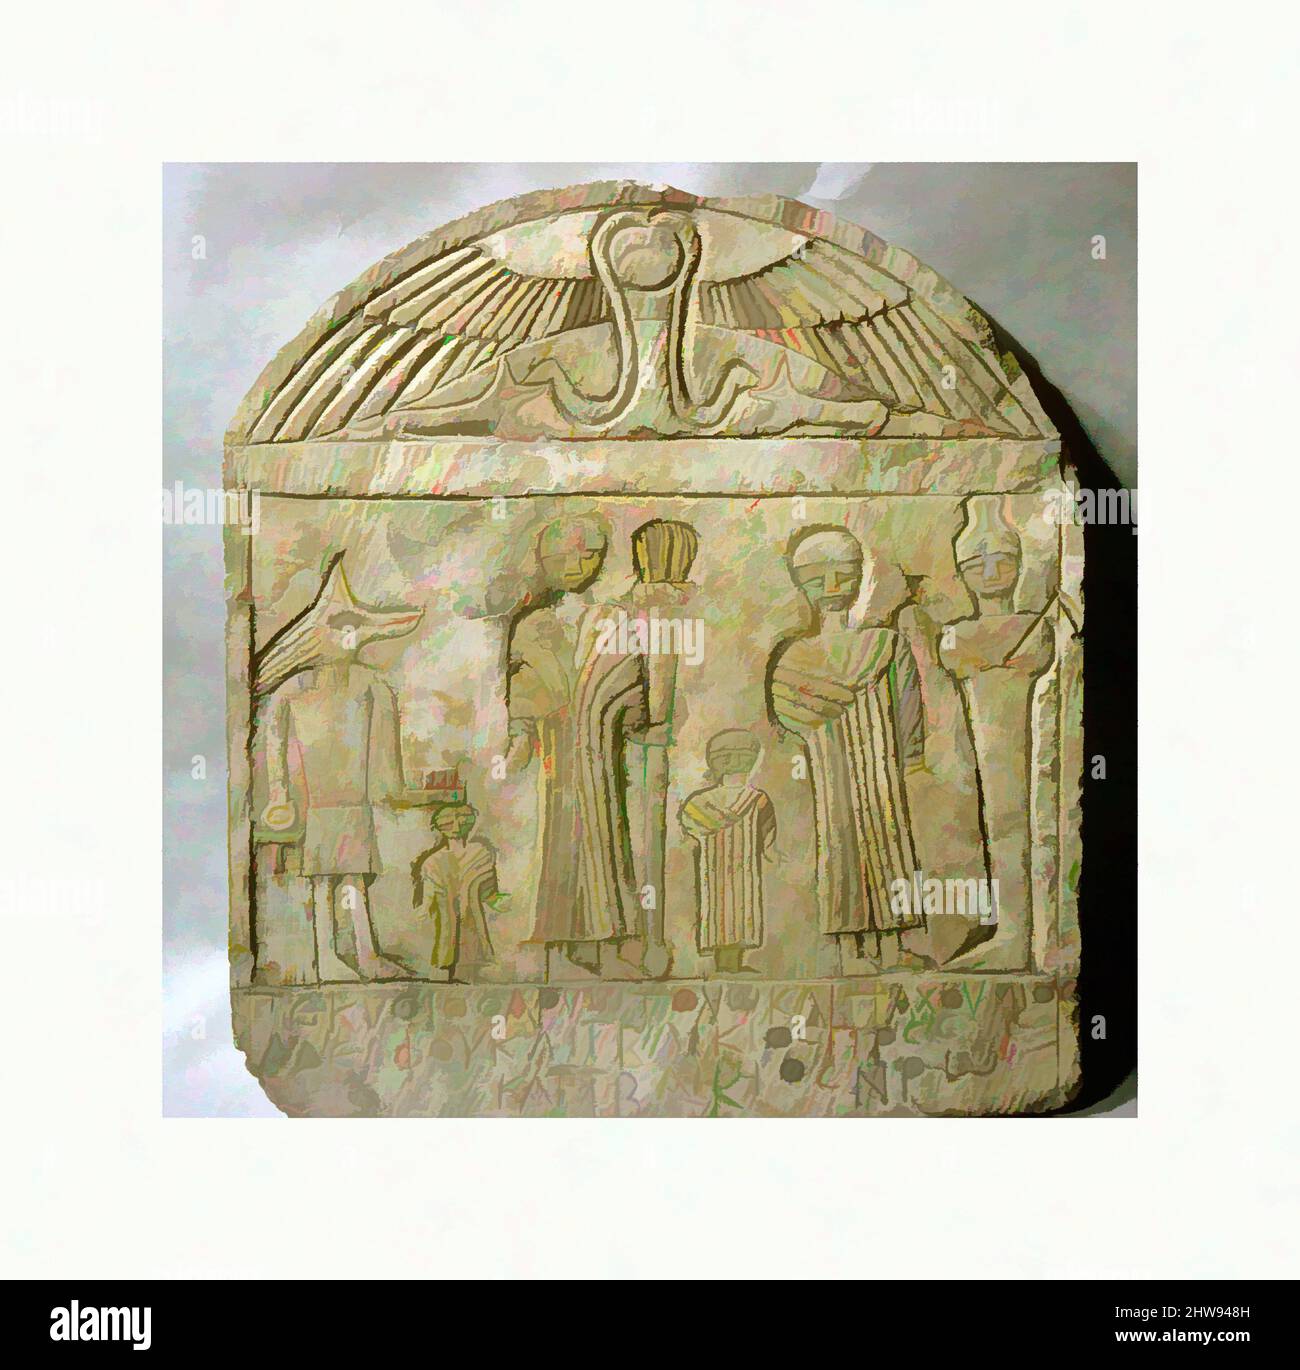 Art inspired by Stela of Pekysis, Roman Period, 1st century B.C.–A.D. 4th century, From Egypt, Northern Upper Egypt, Abydos, Graeco-Roman Cemetery, Tomb 193, Garstang excavations 1907, Limestone, H. 38 cm (14 15/16 in), Flanked by Anubis and Osiris are four figures identified by the, Classic works modernized by Artotop with a splash of modernity. Shapes, color and value, eye-catching visual impact on art. Emotions through freedom of artworks in a contemporary way. A timeless message pursuing a wildly creative new direction. Artists turning to the digital medium and creating the Artotop NFT Stock Photo